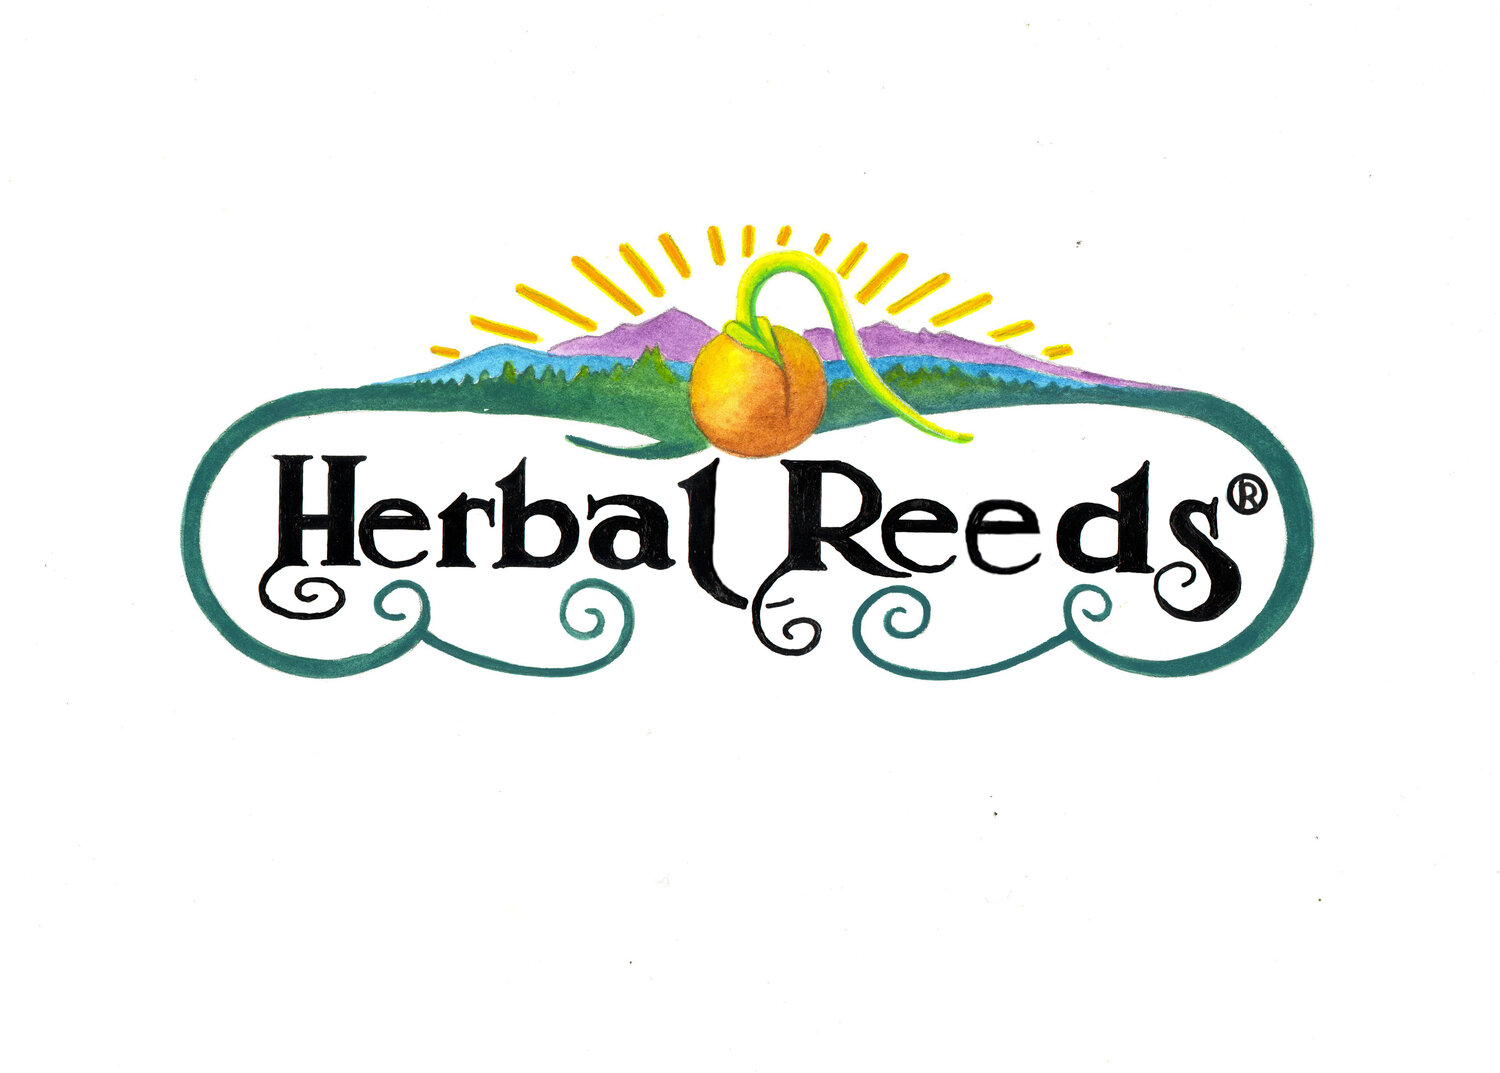 Herbal Reads